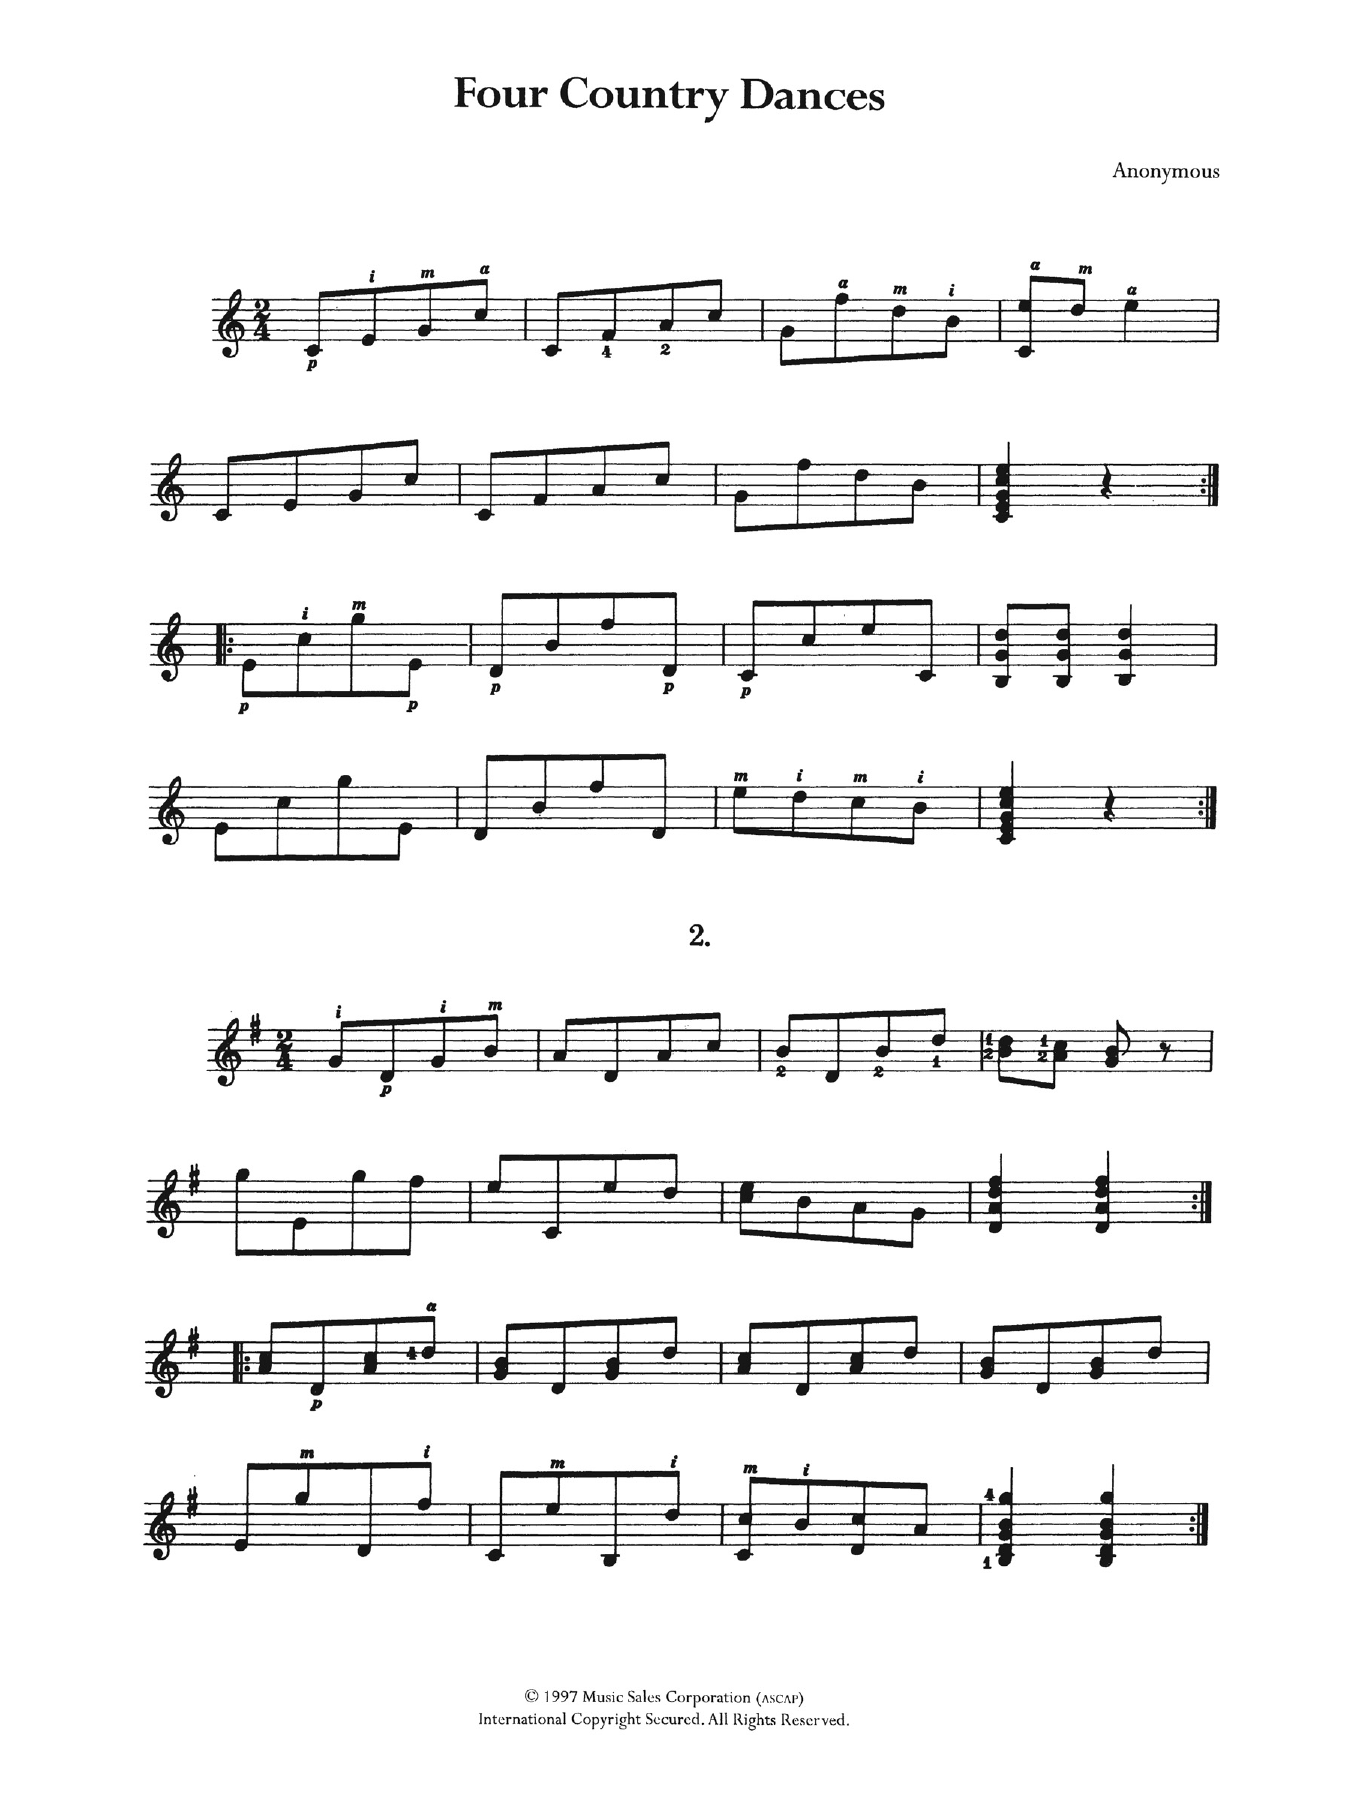 Download Anonymous Four Country Dances Sheet Music